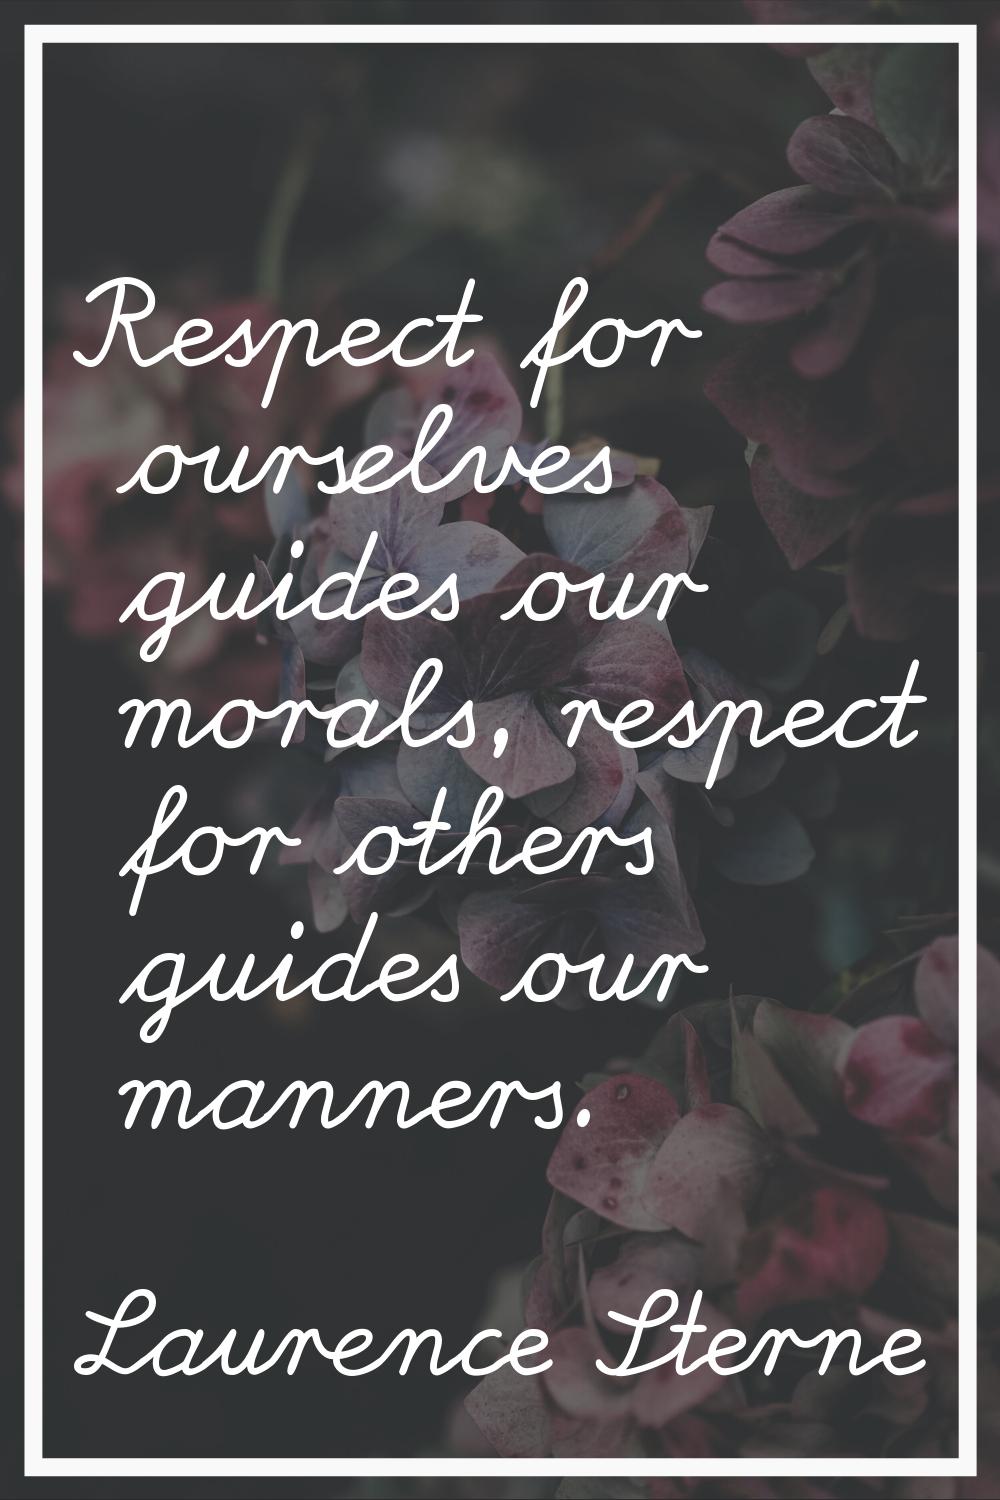 Respect for ourselves guides our morals, respect for others guides our manners.